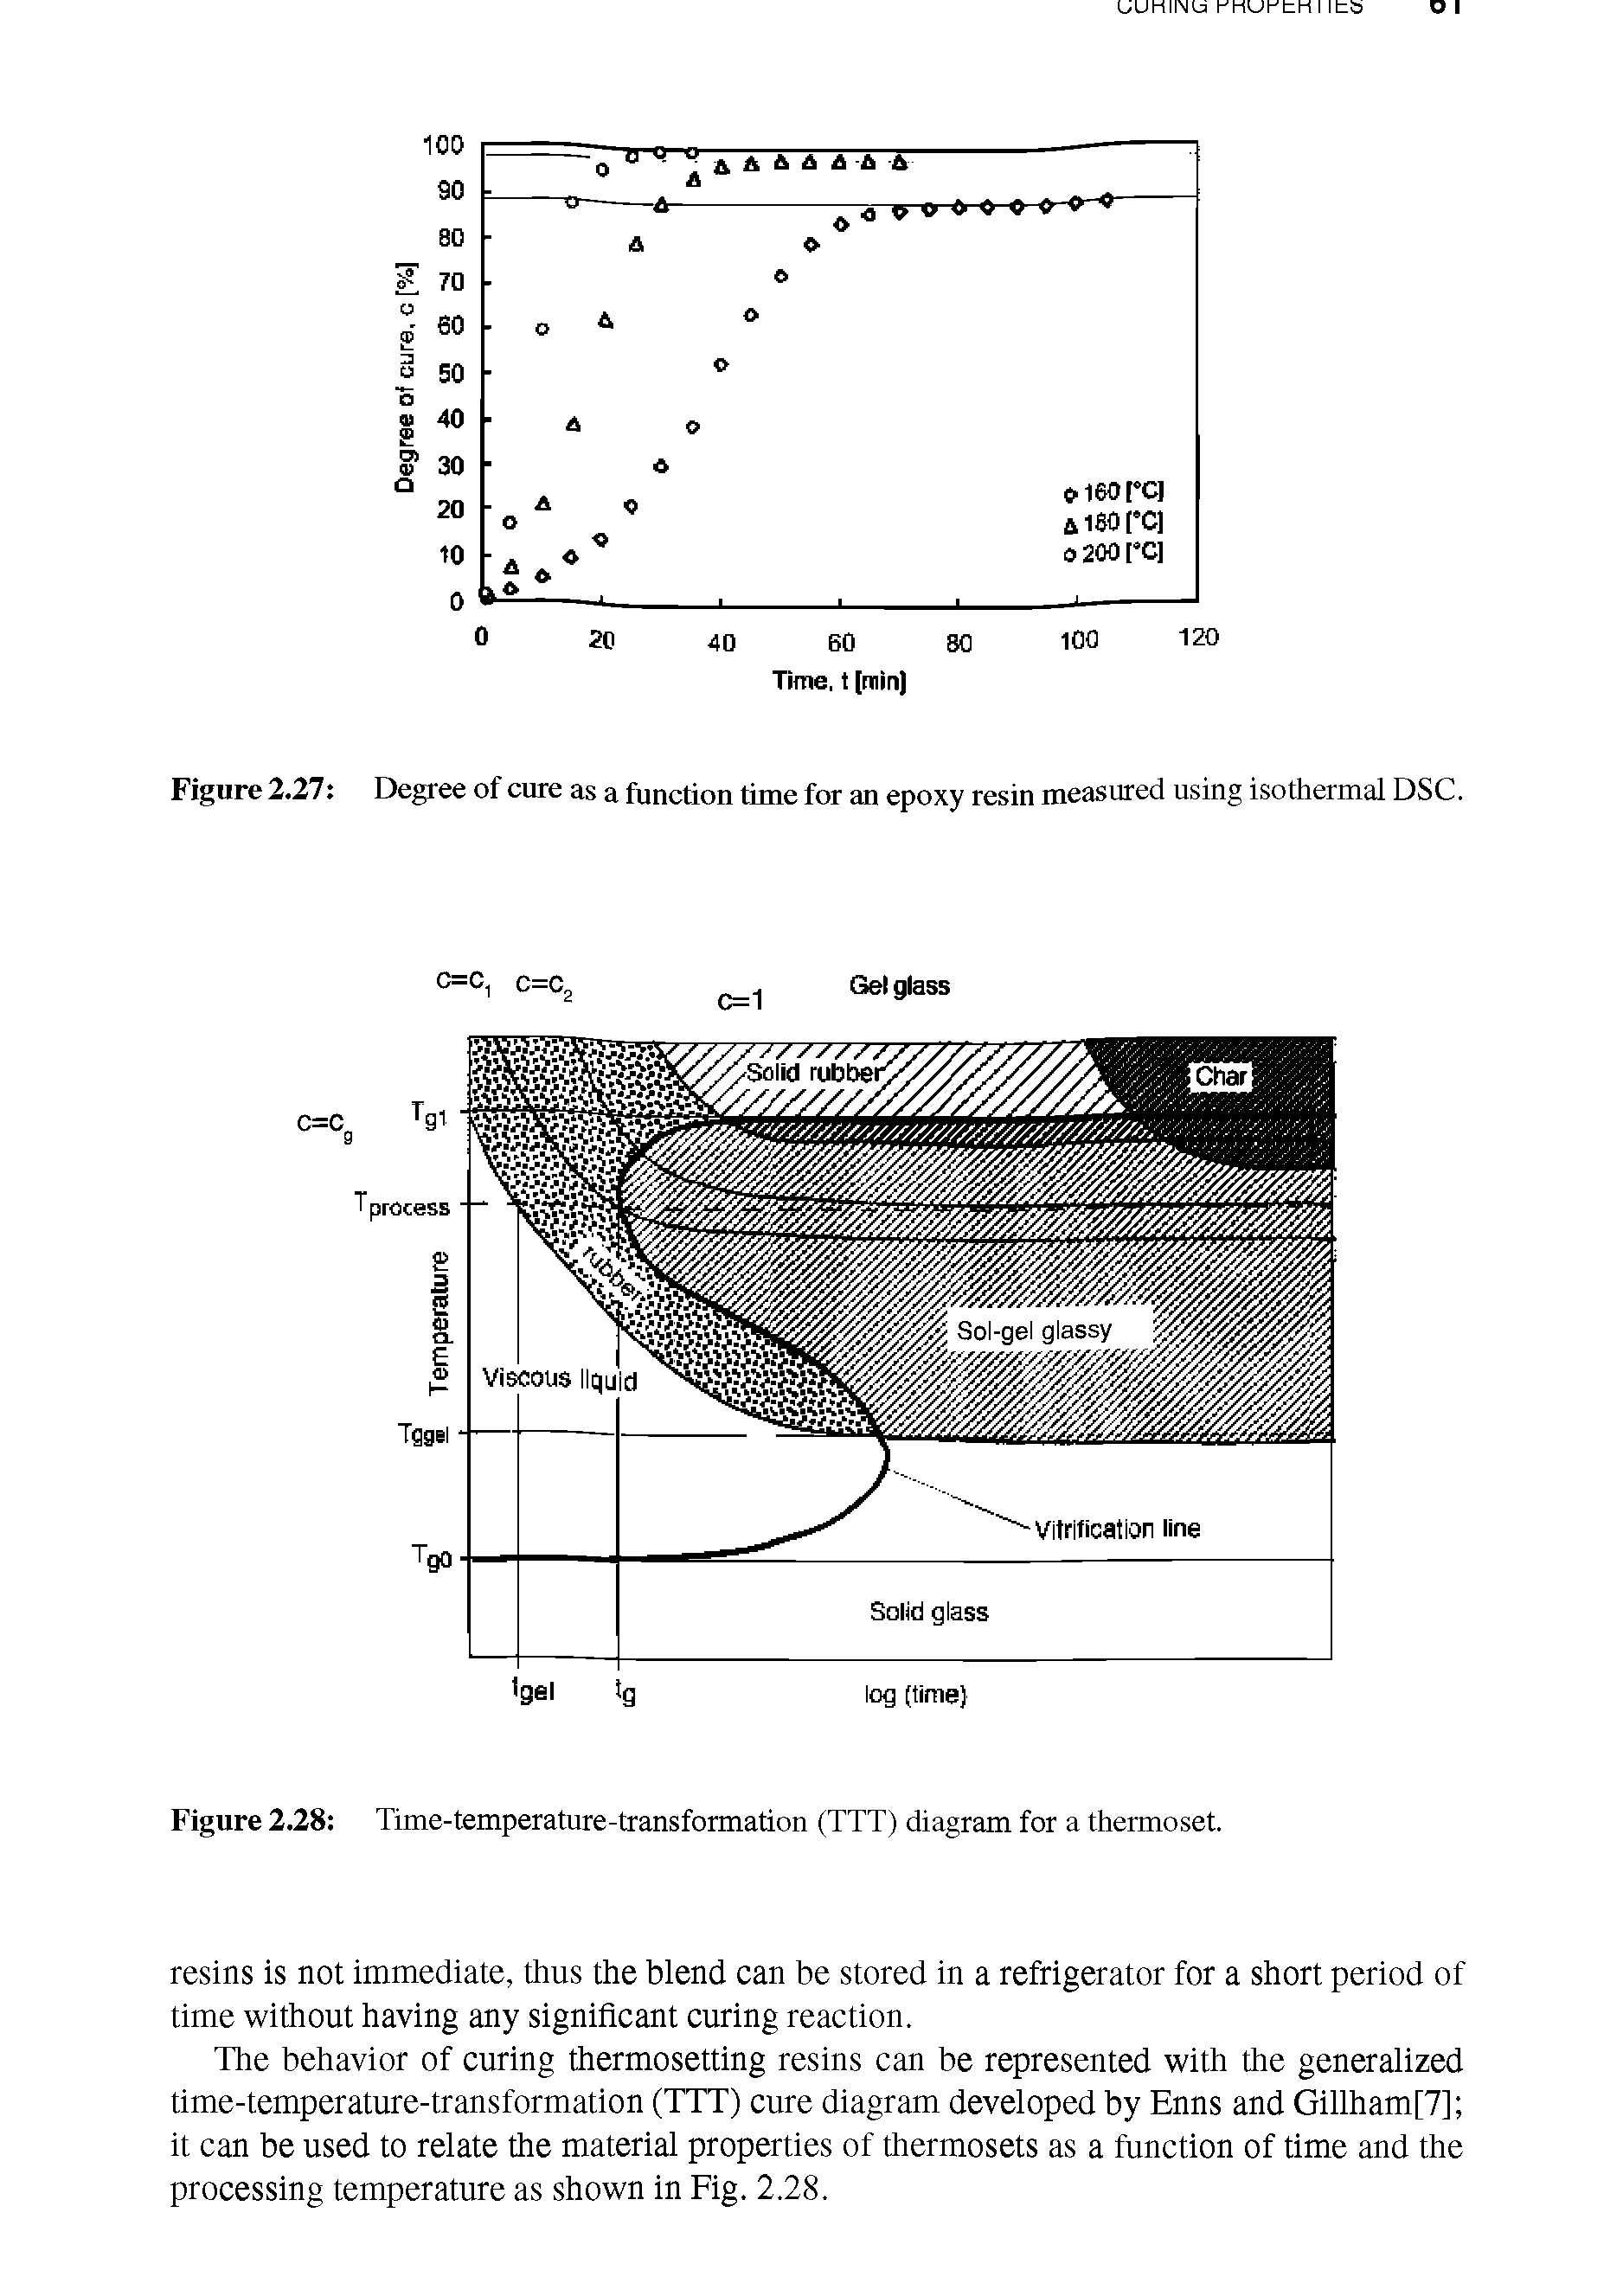 Figure 2.27 Degree of cure as a function time for an epoxy resin measured using isothermal DSC.